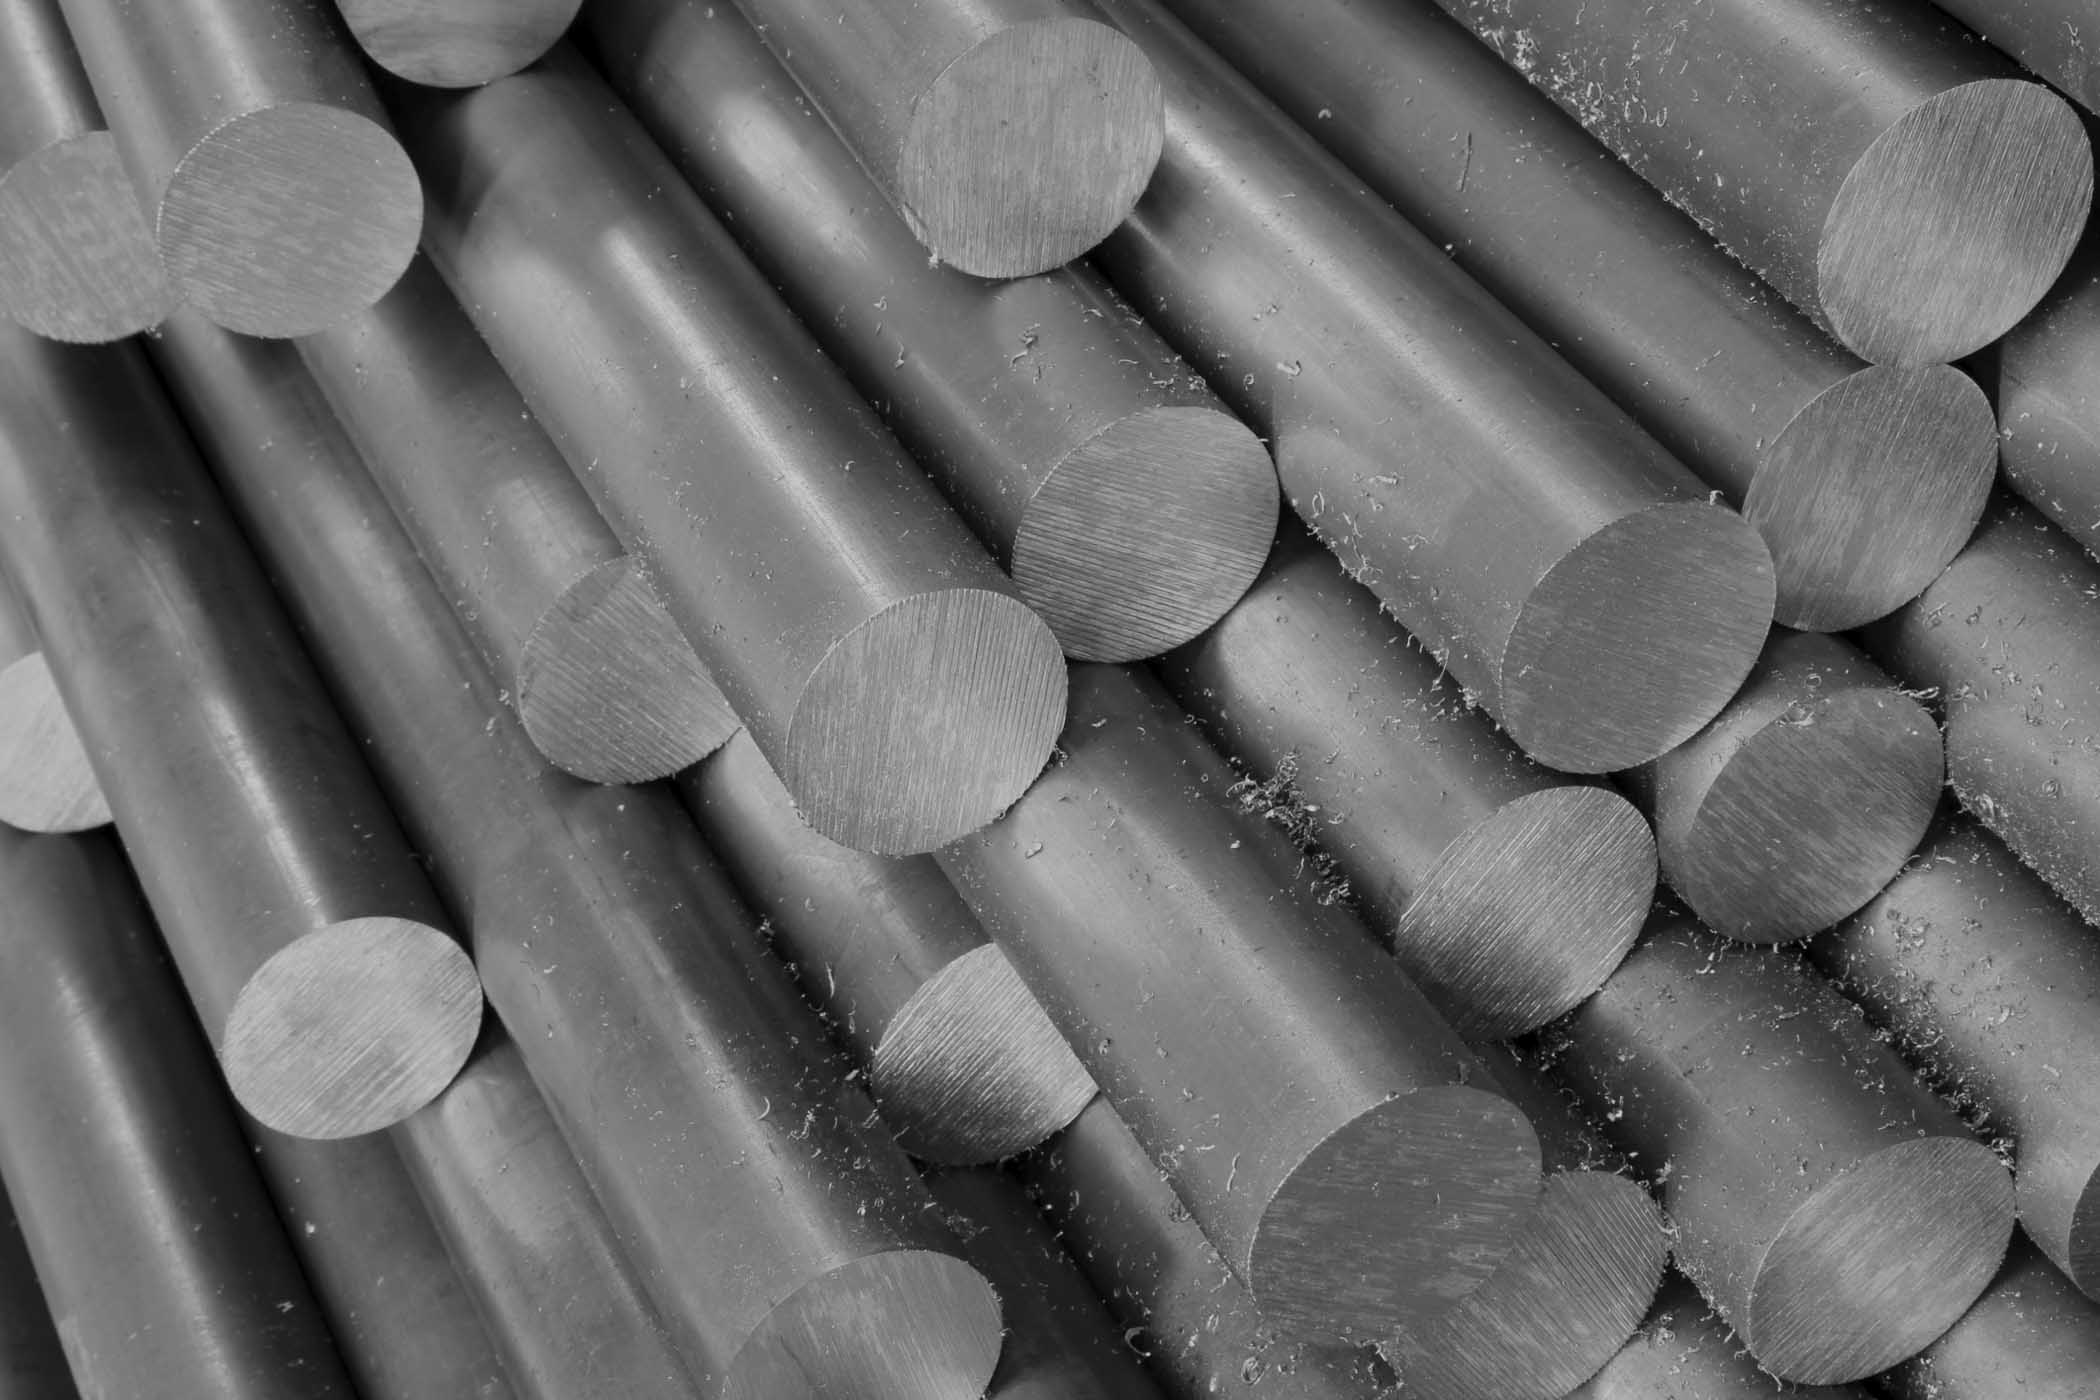 Grayscale photo of metal billets